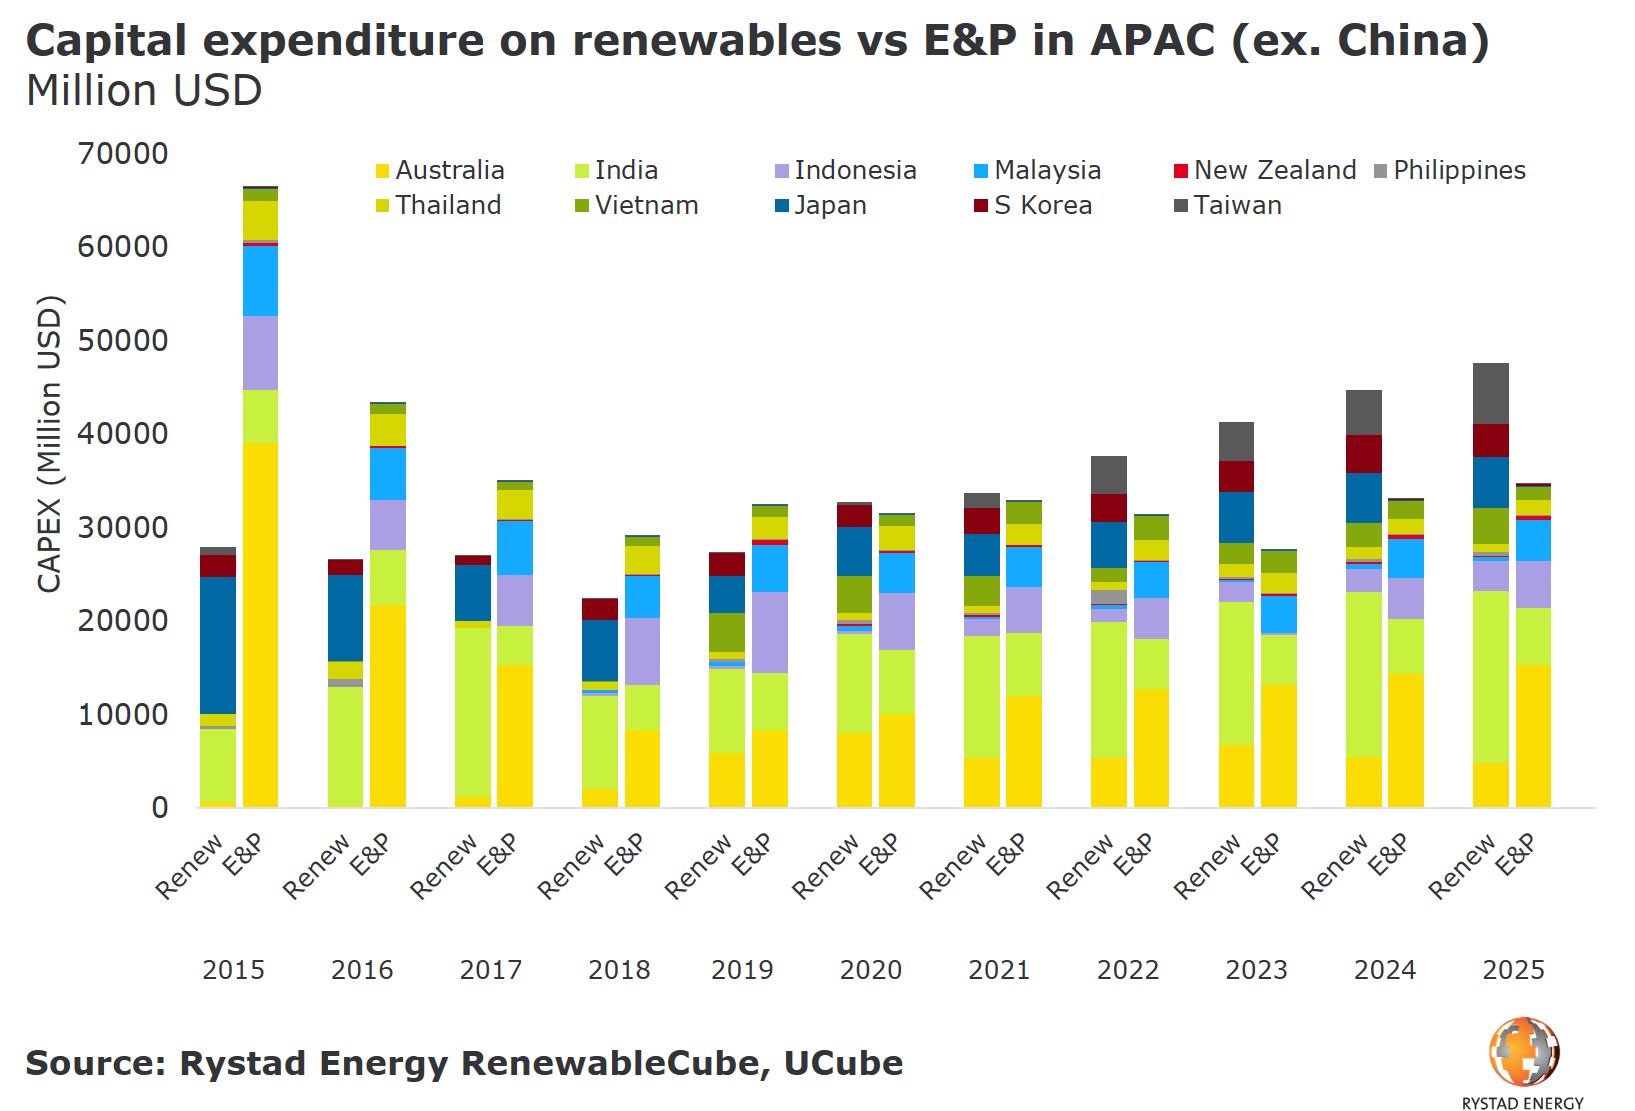 20190523_PR_Charts_Renewed energy in Asian Renew vs EP by country.jpg